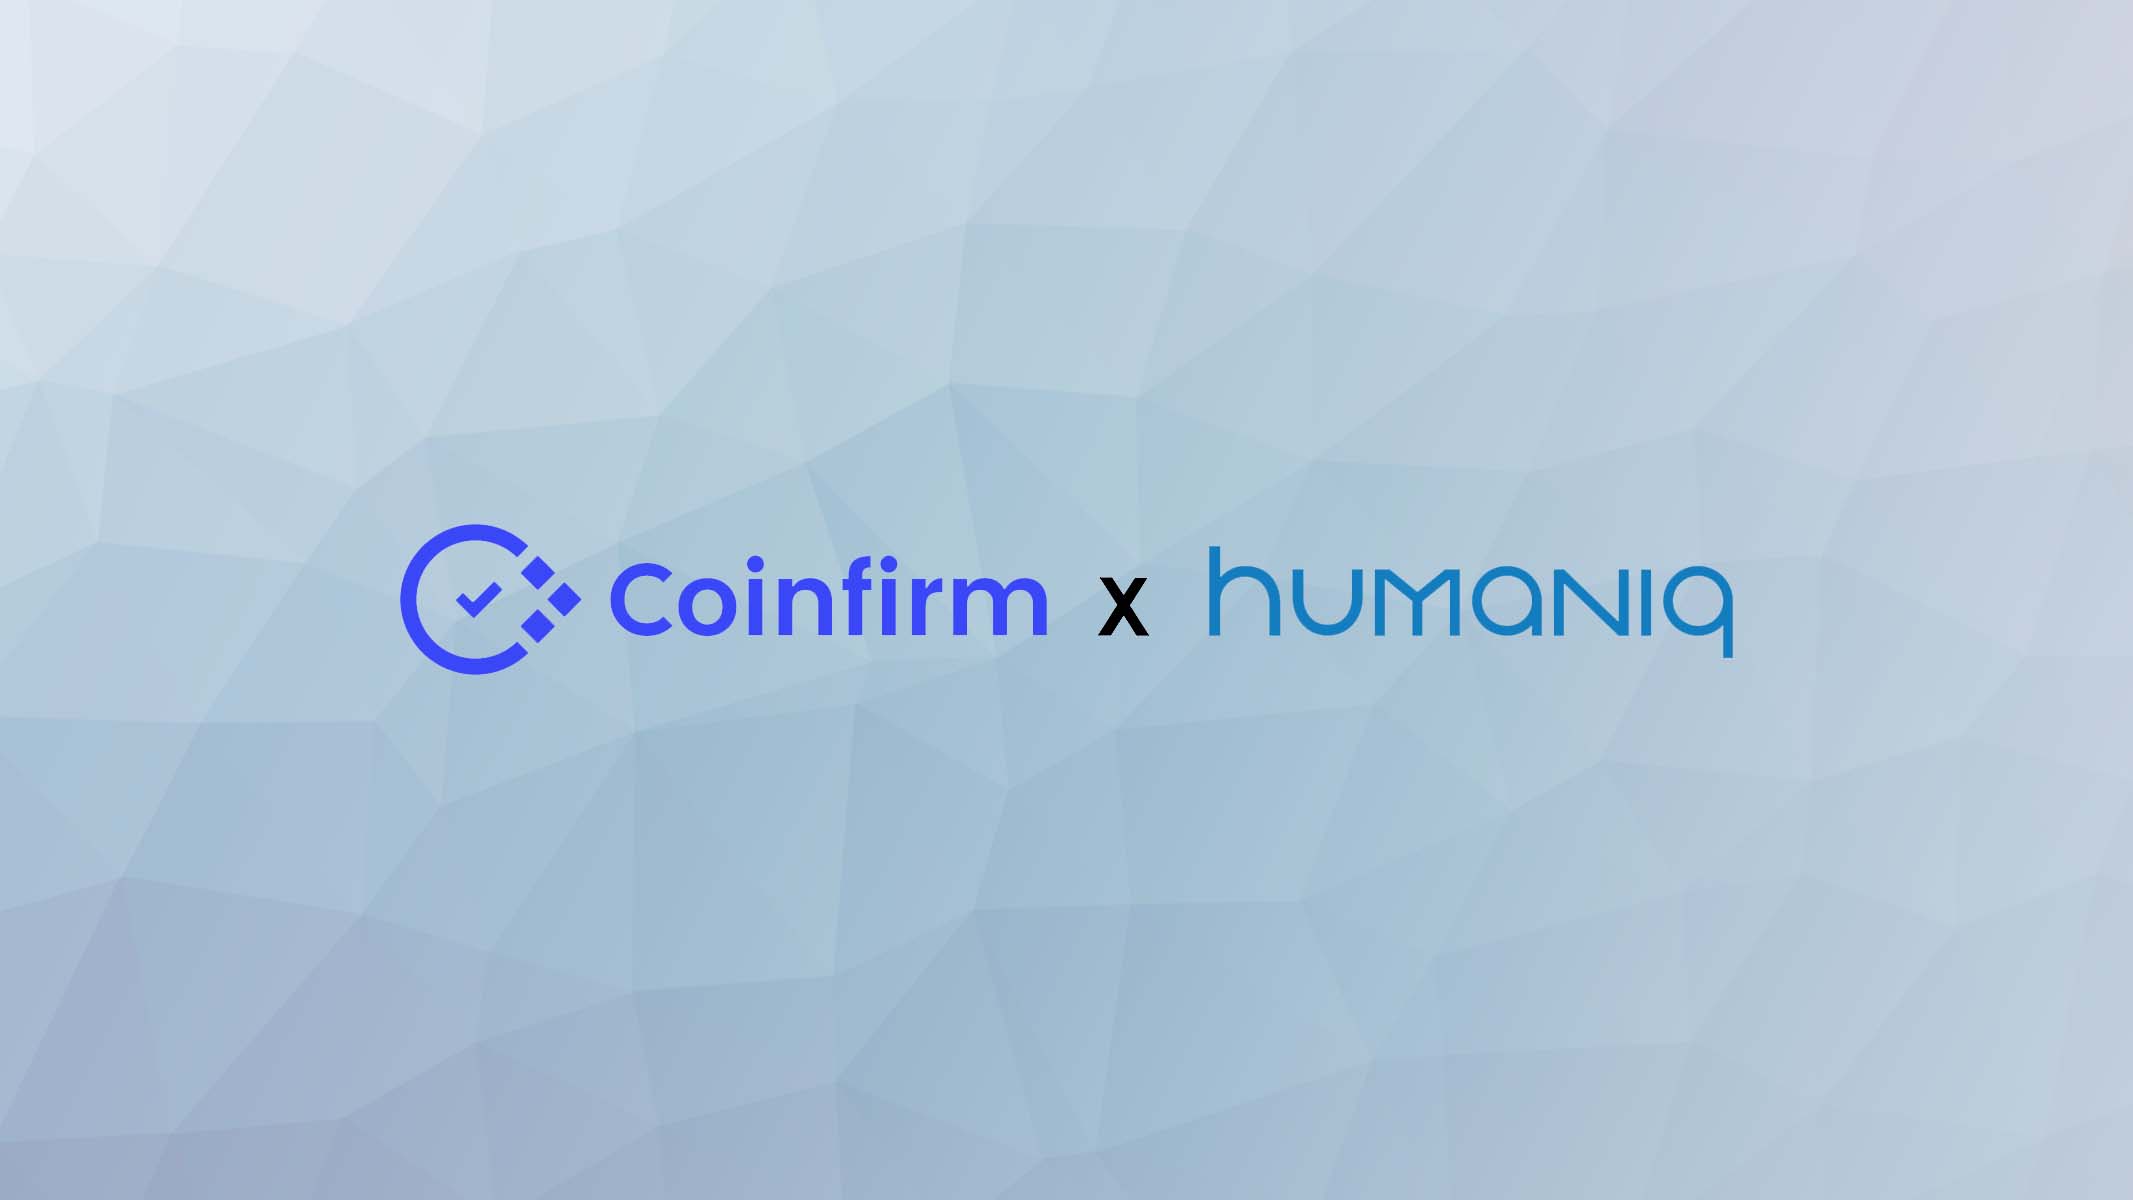 Fintech Innovator Humaniq and Regtech Leader Coinfirm Partner to Bring Financial Transparency and Inclusion to Developing Economies With Blockchain